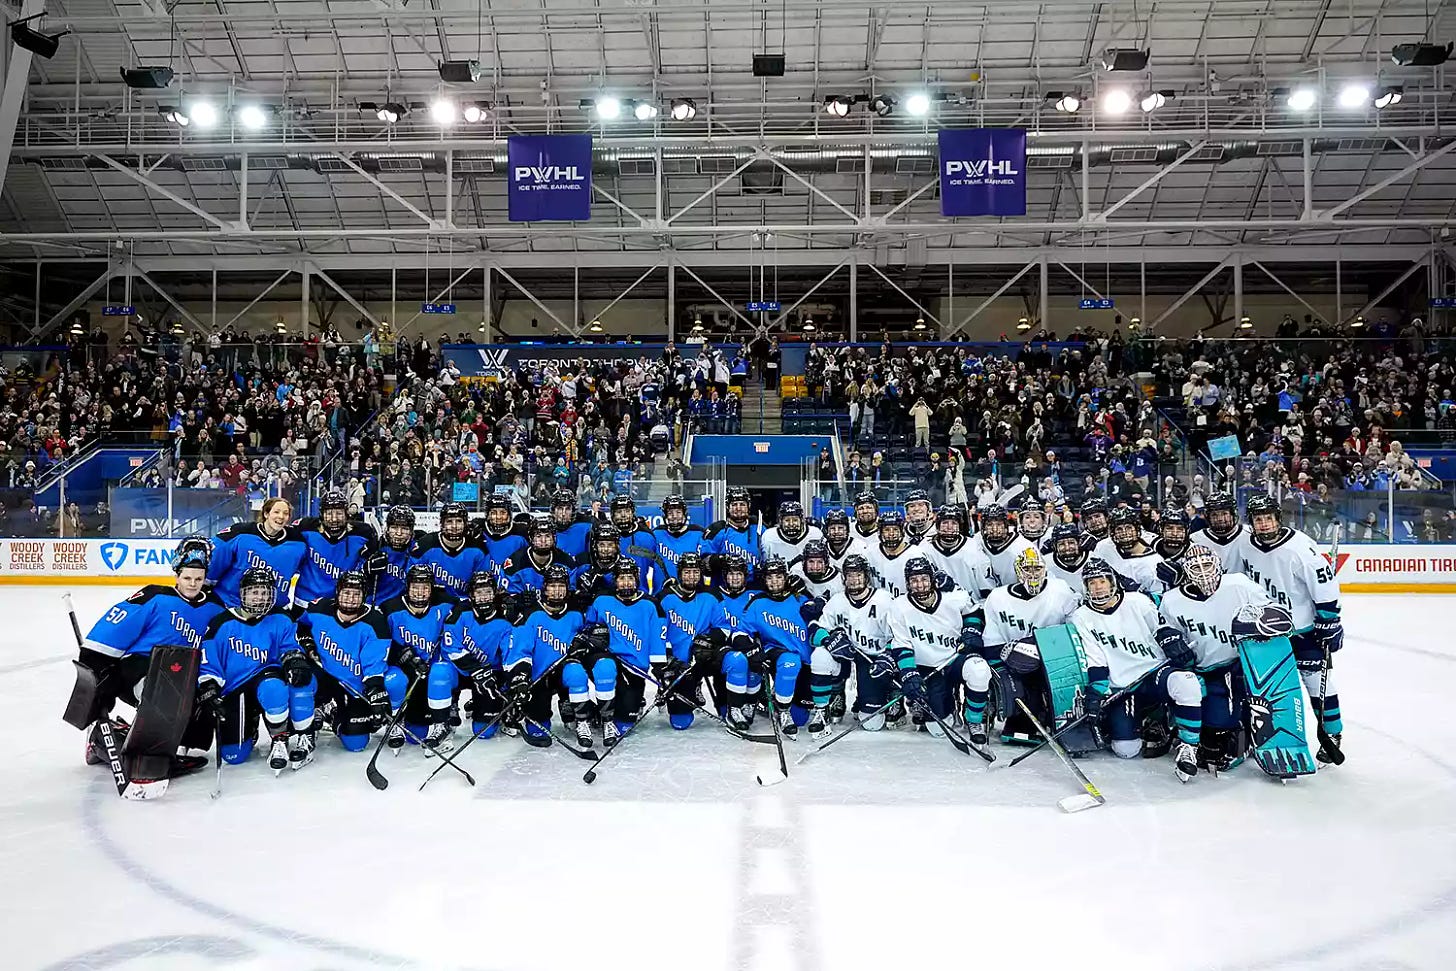 Toronto and New York players pose for a group photo after the inaugural PWHL hockey game at the Mattamy Athletic Centre on January 1, 2024 in Toronto, Ontario, Canada. 